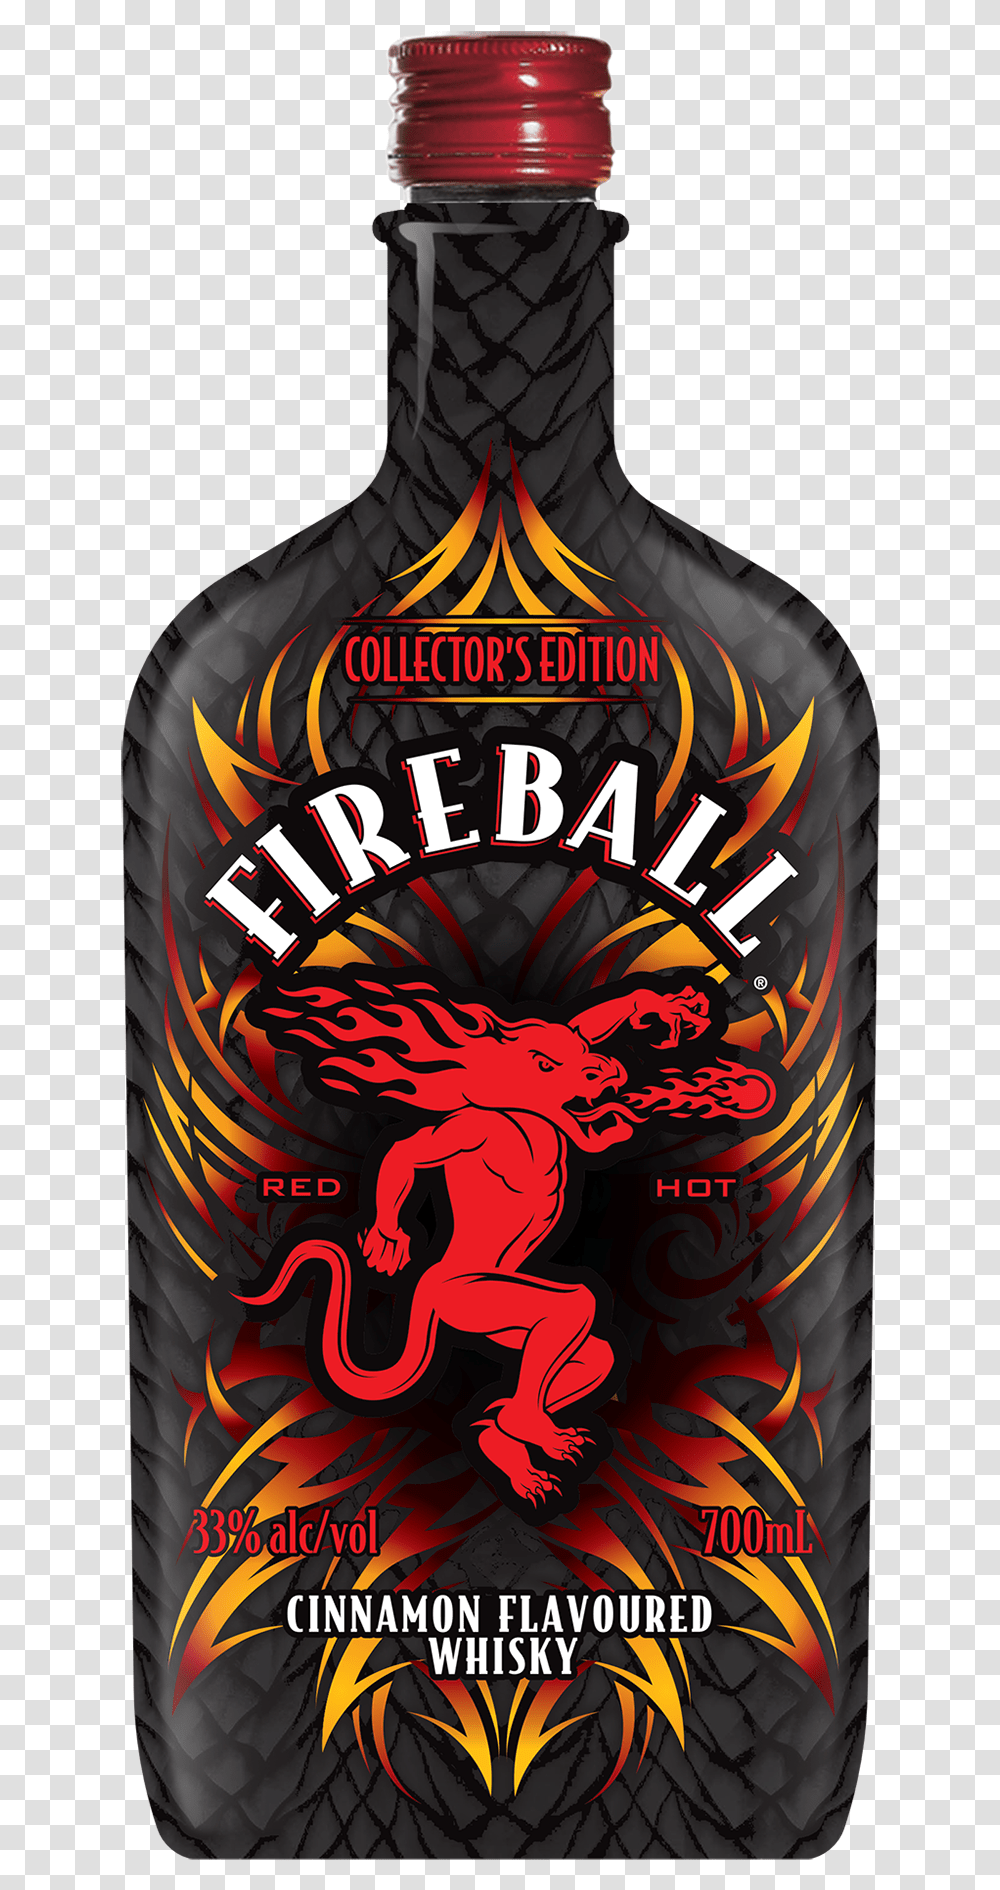 Fireball Cinnamon Whisky Collectors Edition 700ml Fireball Whiskey, Advertisement, Poster, Beverage, Alcohol Transparent Png